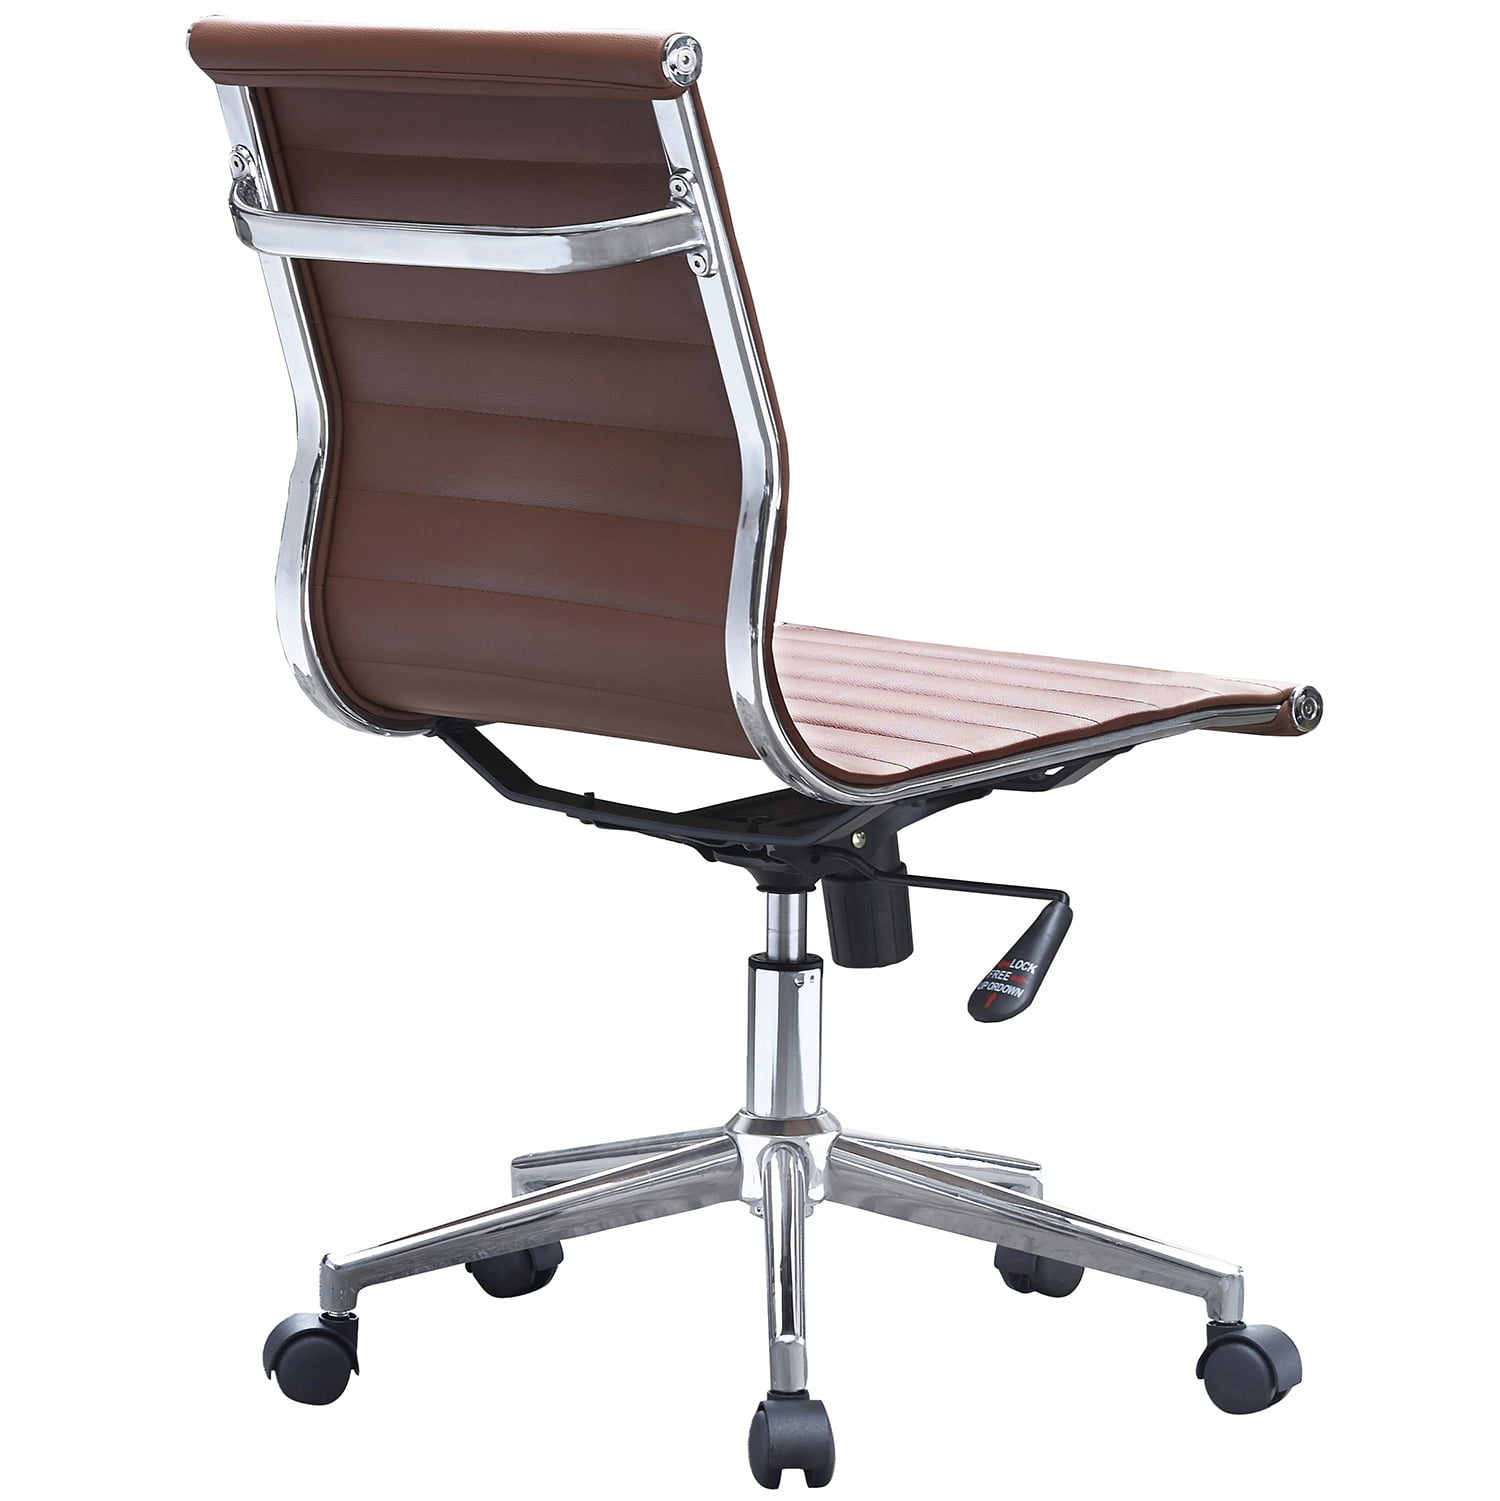 Aurelle Home Modern Ribbed Leather Low Back Office Swivel Chair - Tan